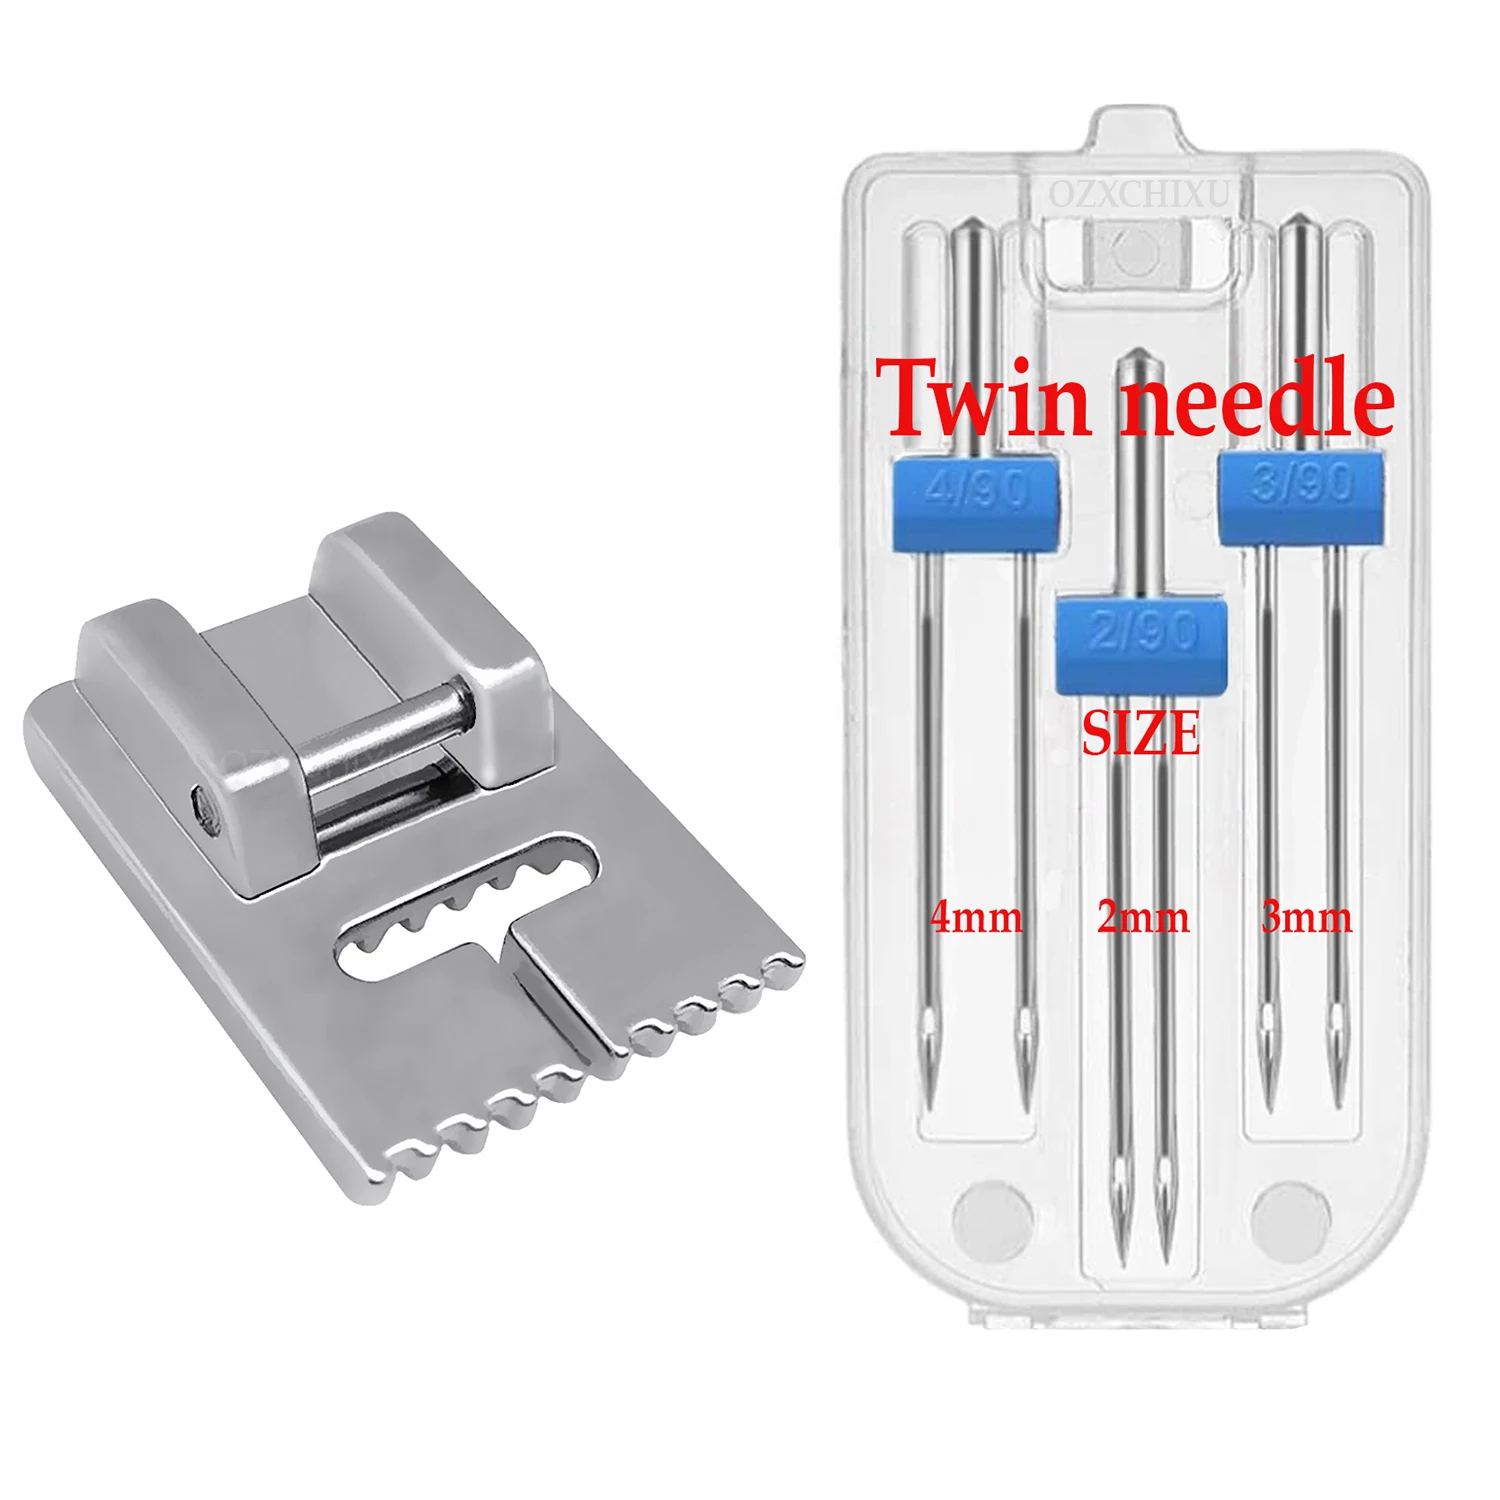 3 PCS Twin Needles Size 2/3/4mm And Wrinkled 9 Grooves Sewing Presser Foot Feet For Singer Brother Sewing Machine Accessories